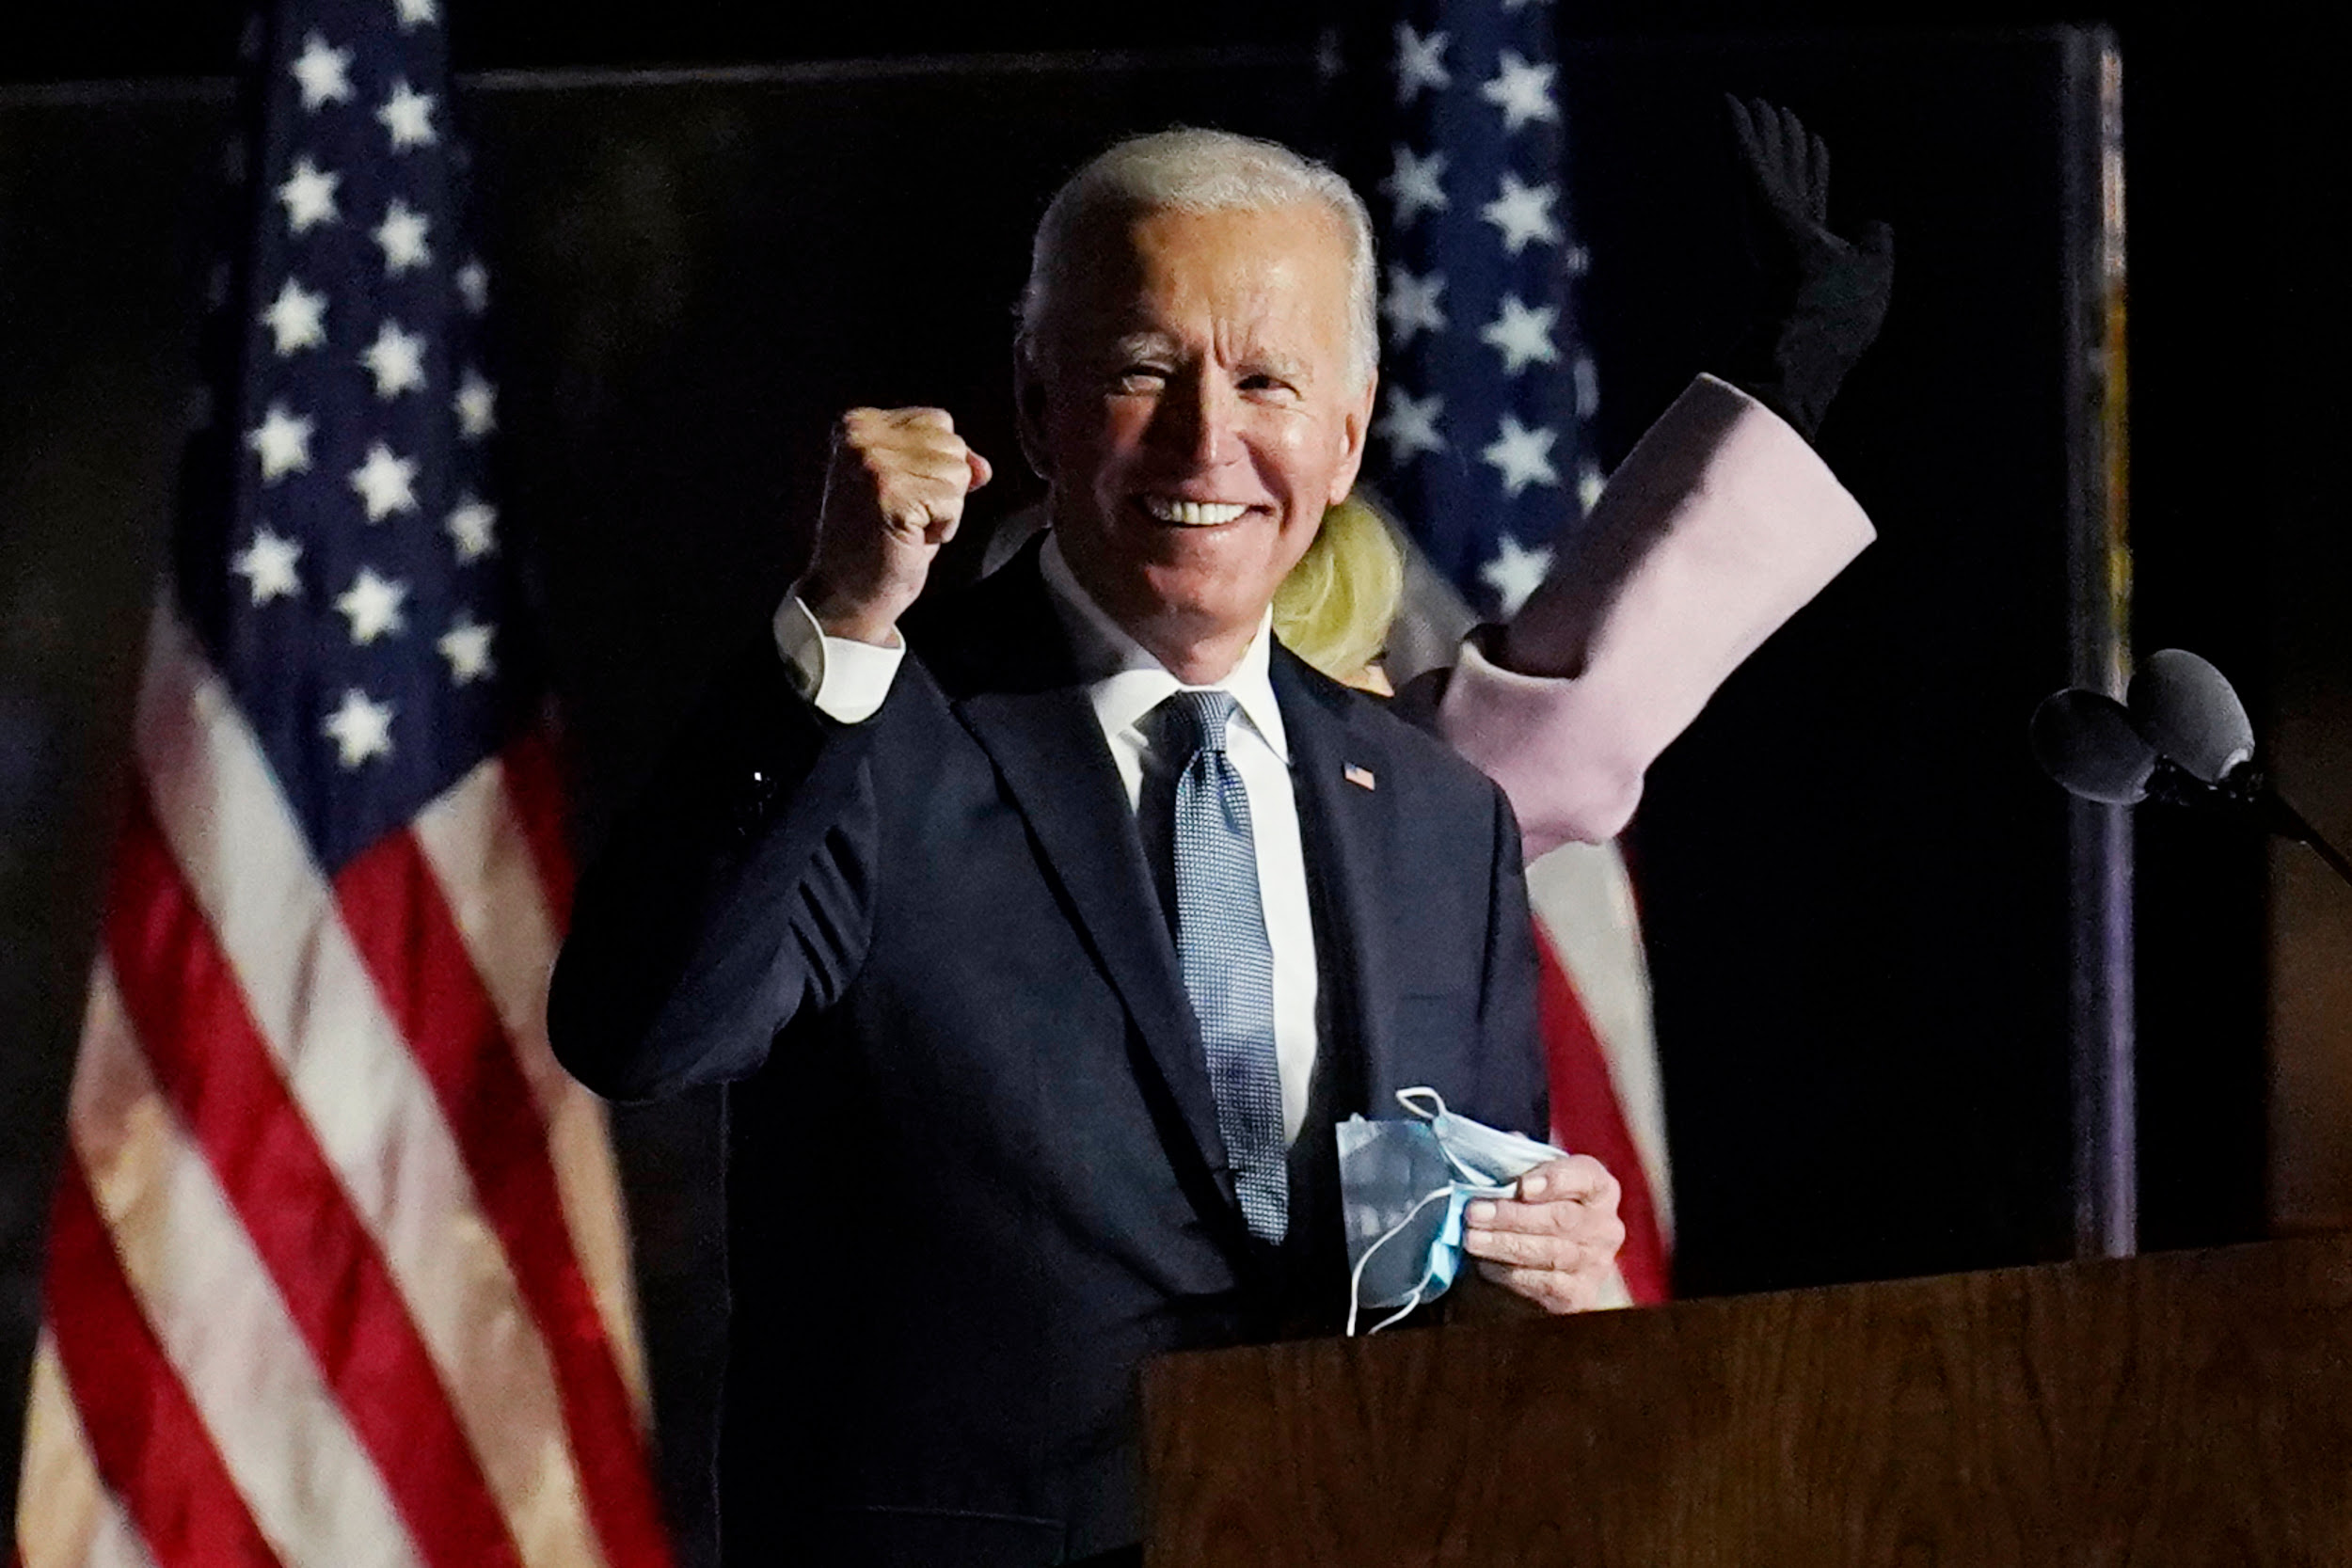 Joe Biden calls for increased funds to fight HIV